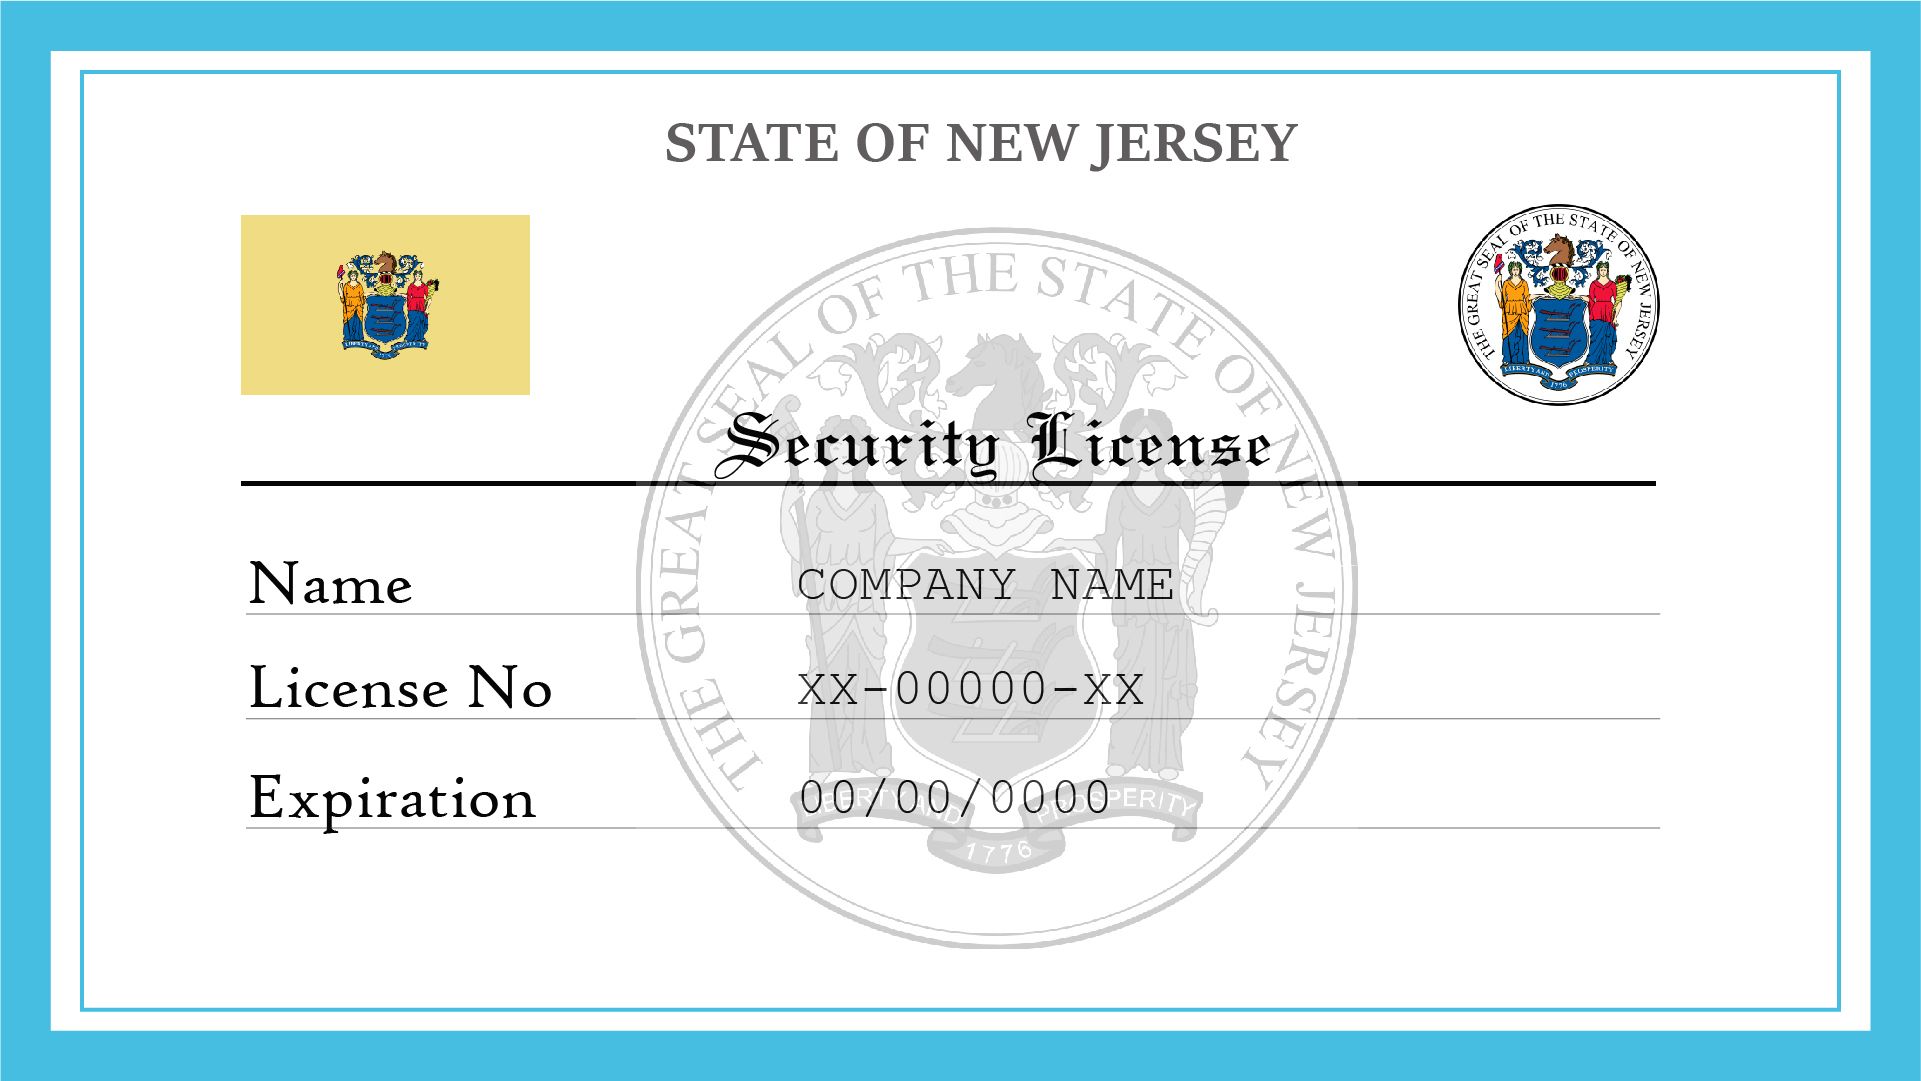 New Jersey Security License 644a821a36 